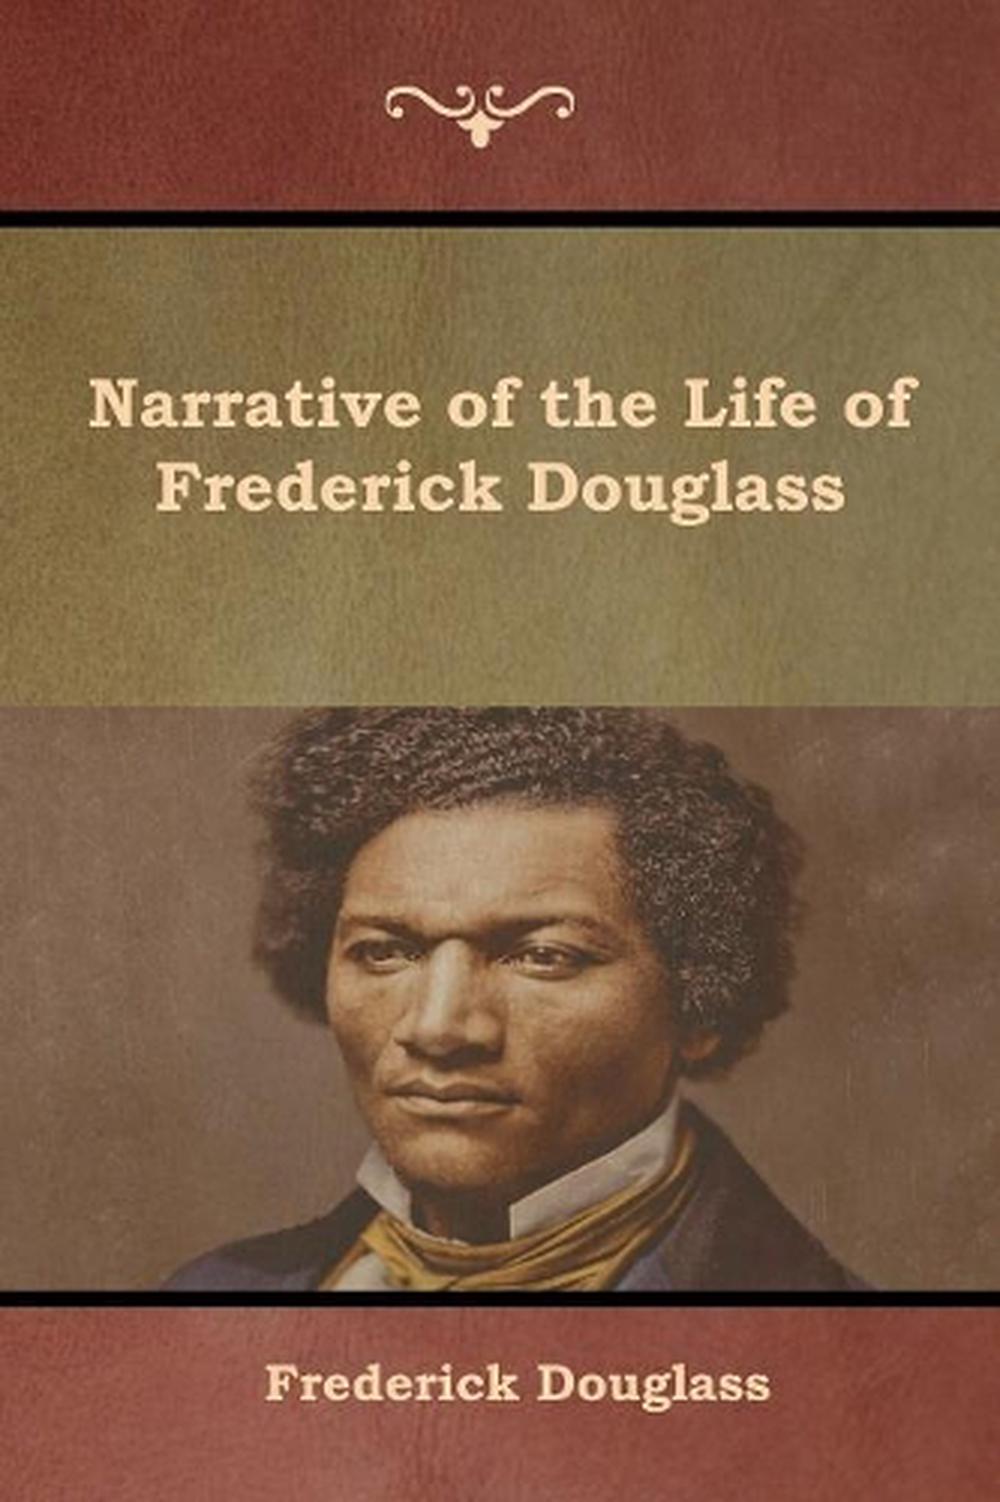 the life and narrative of frederick douglass